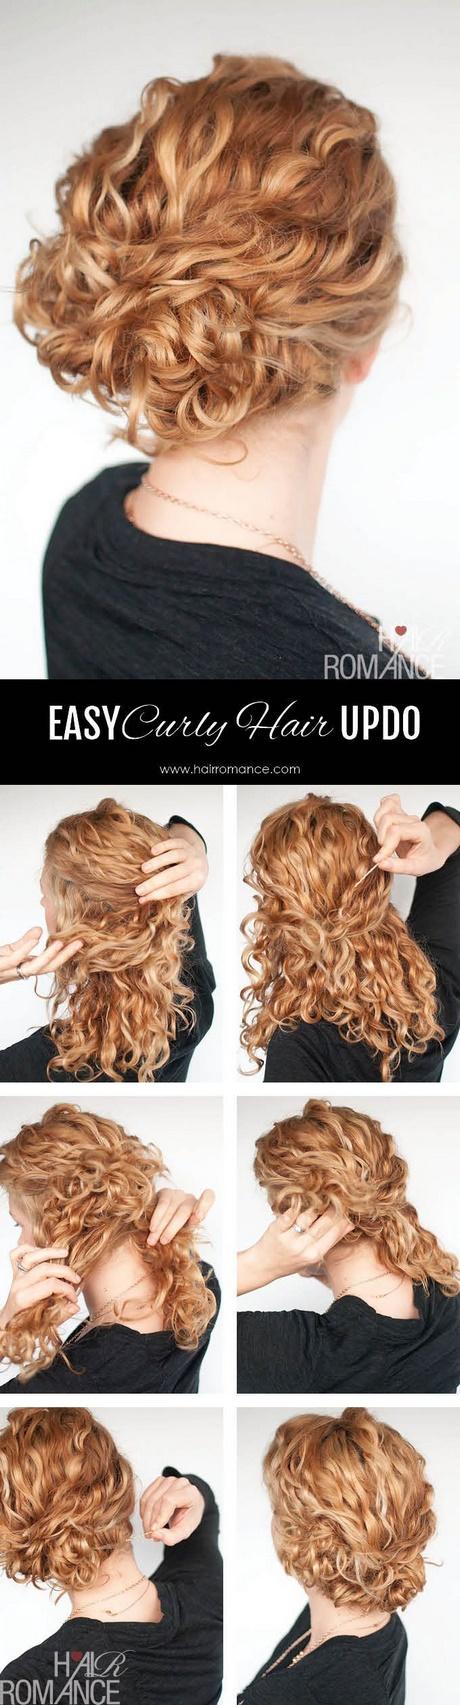 Easy everyday updos for long hair easy-everyday-updos-for-long-hair-36_14